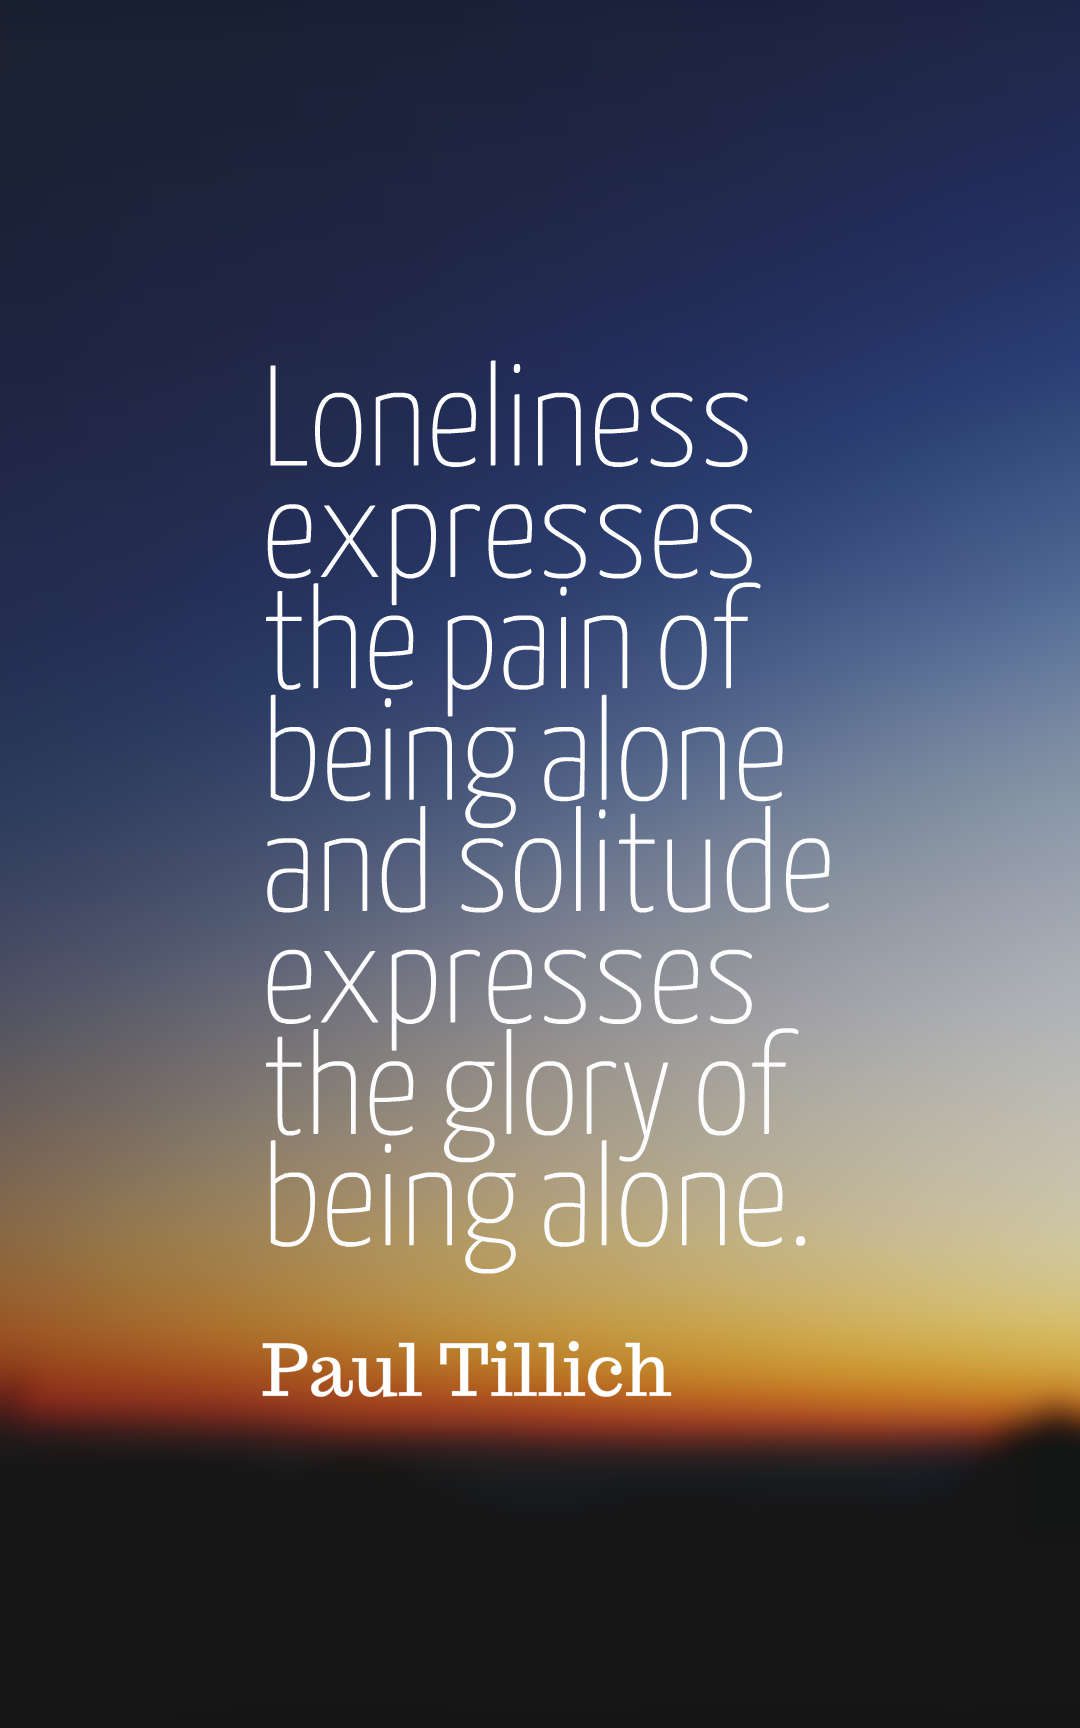 Best Loneliness Quotes: 45 Lonely Quotes with Images